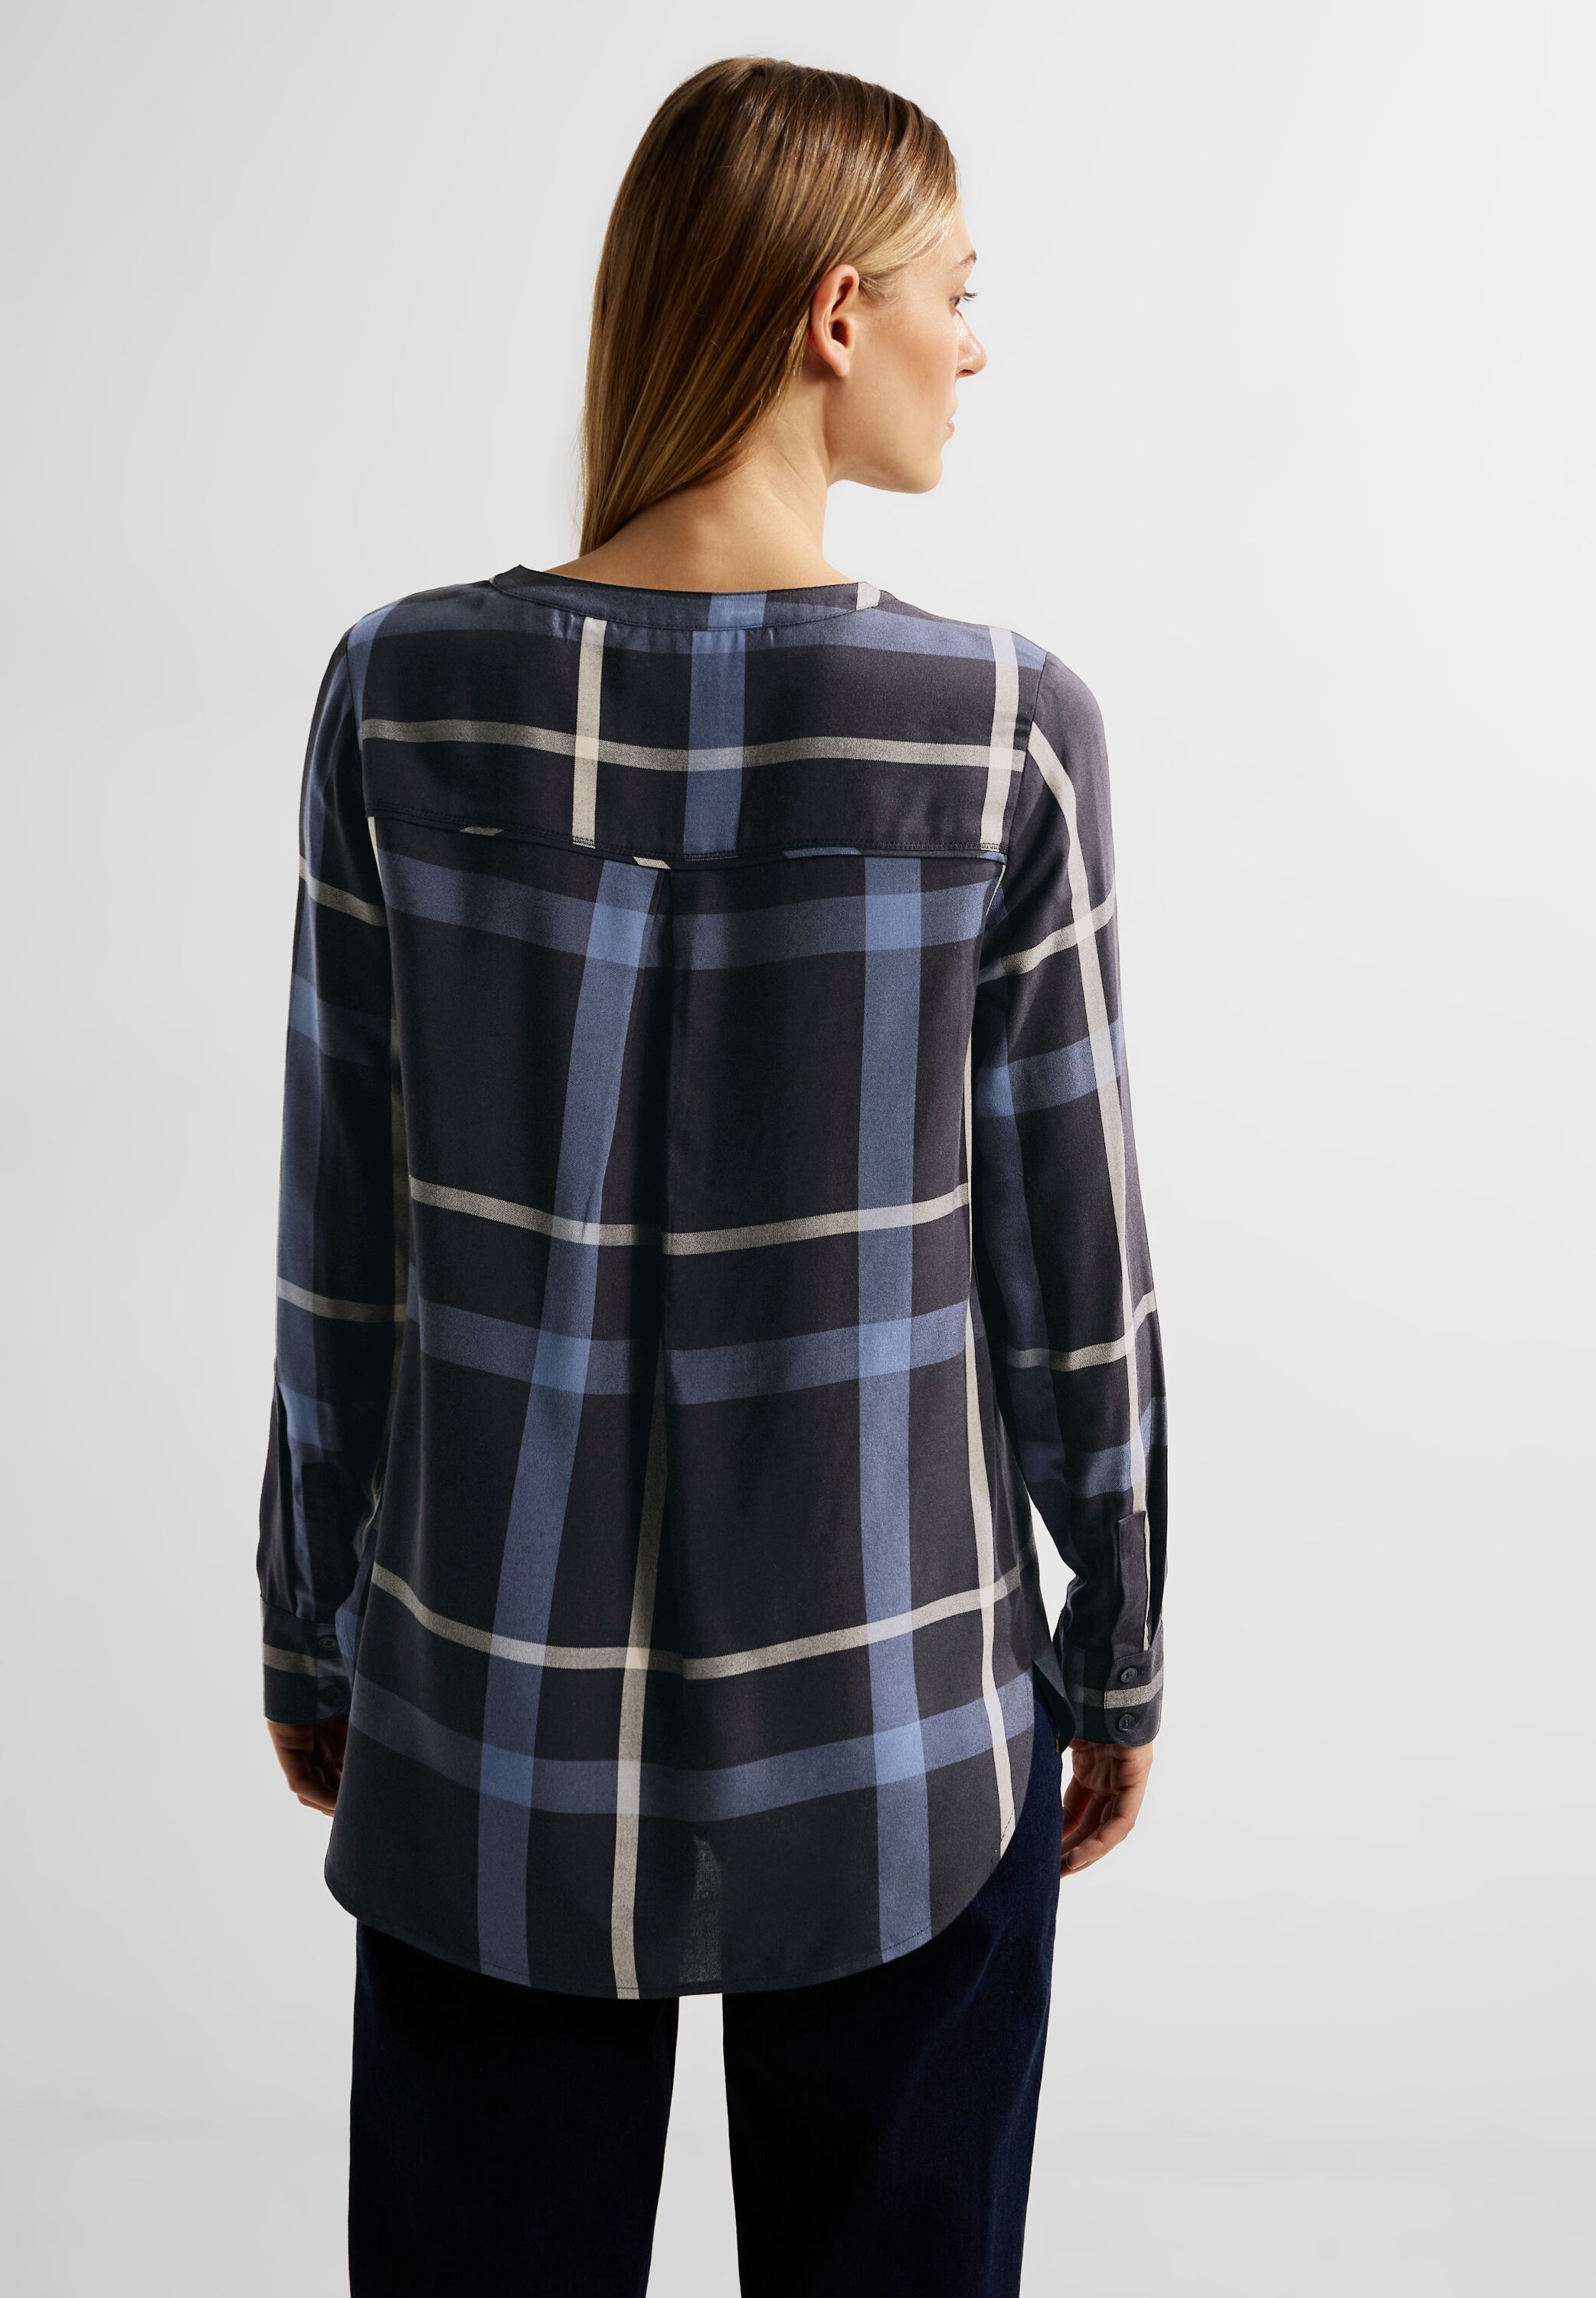 bei Karo-Druck Blouse«, Longbluse Long »Check OTTOversand Cecil